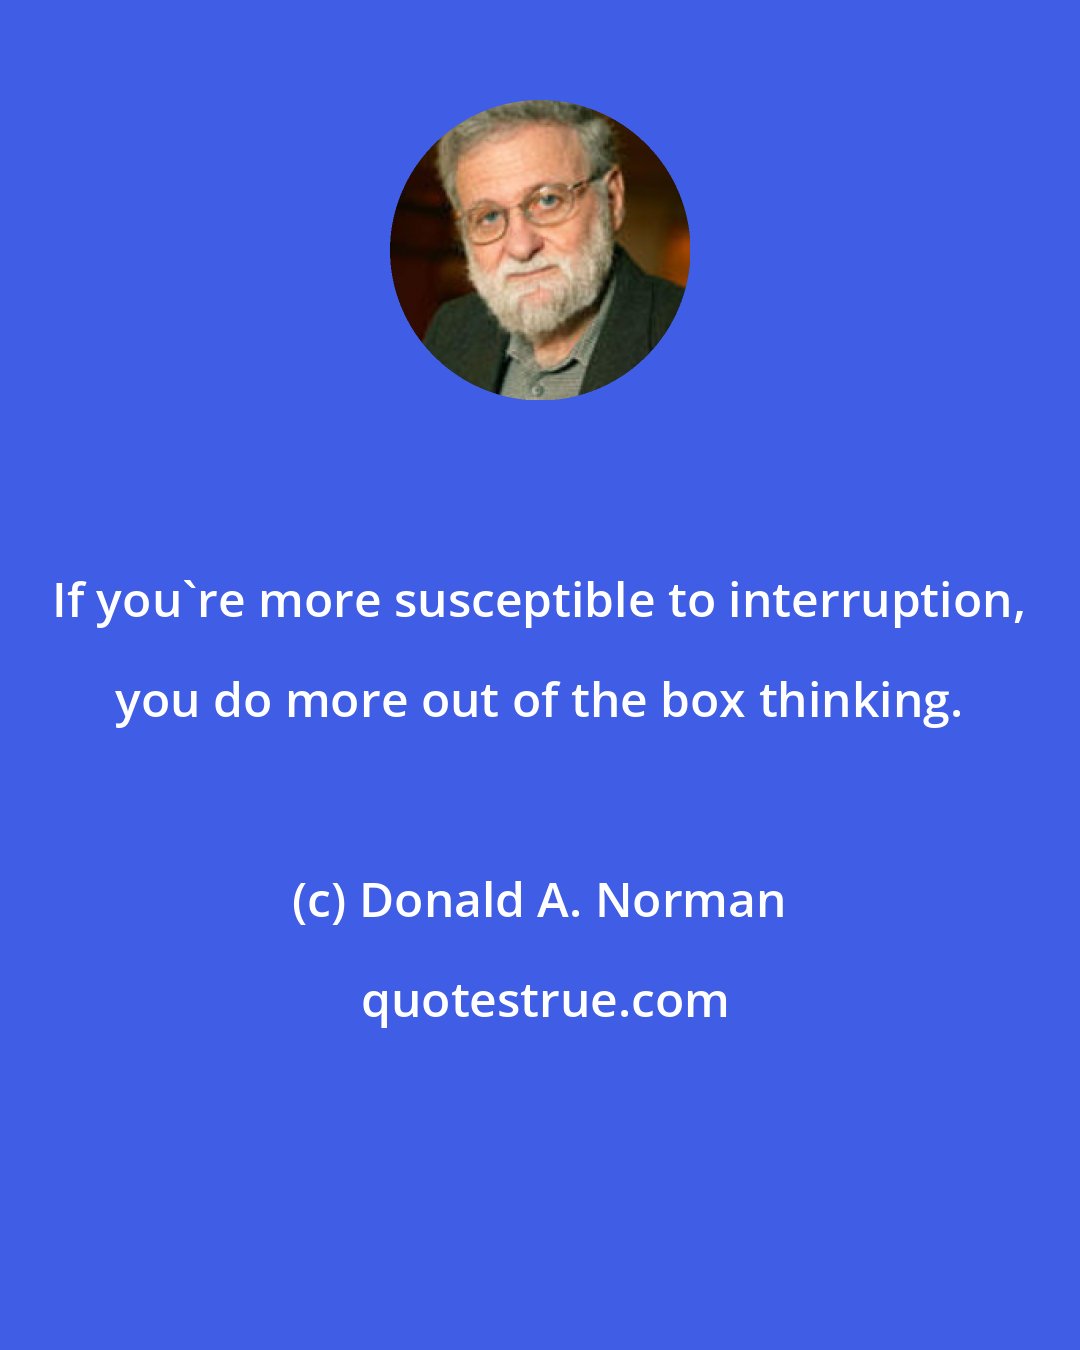 Donald A. Norman: If you're more susceptible to interruption, you do more out of the box thinking.